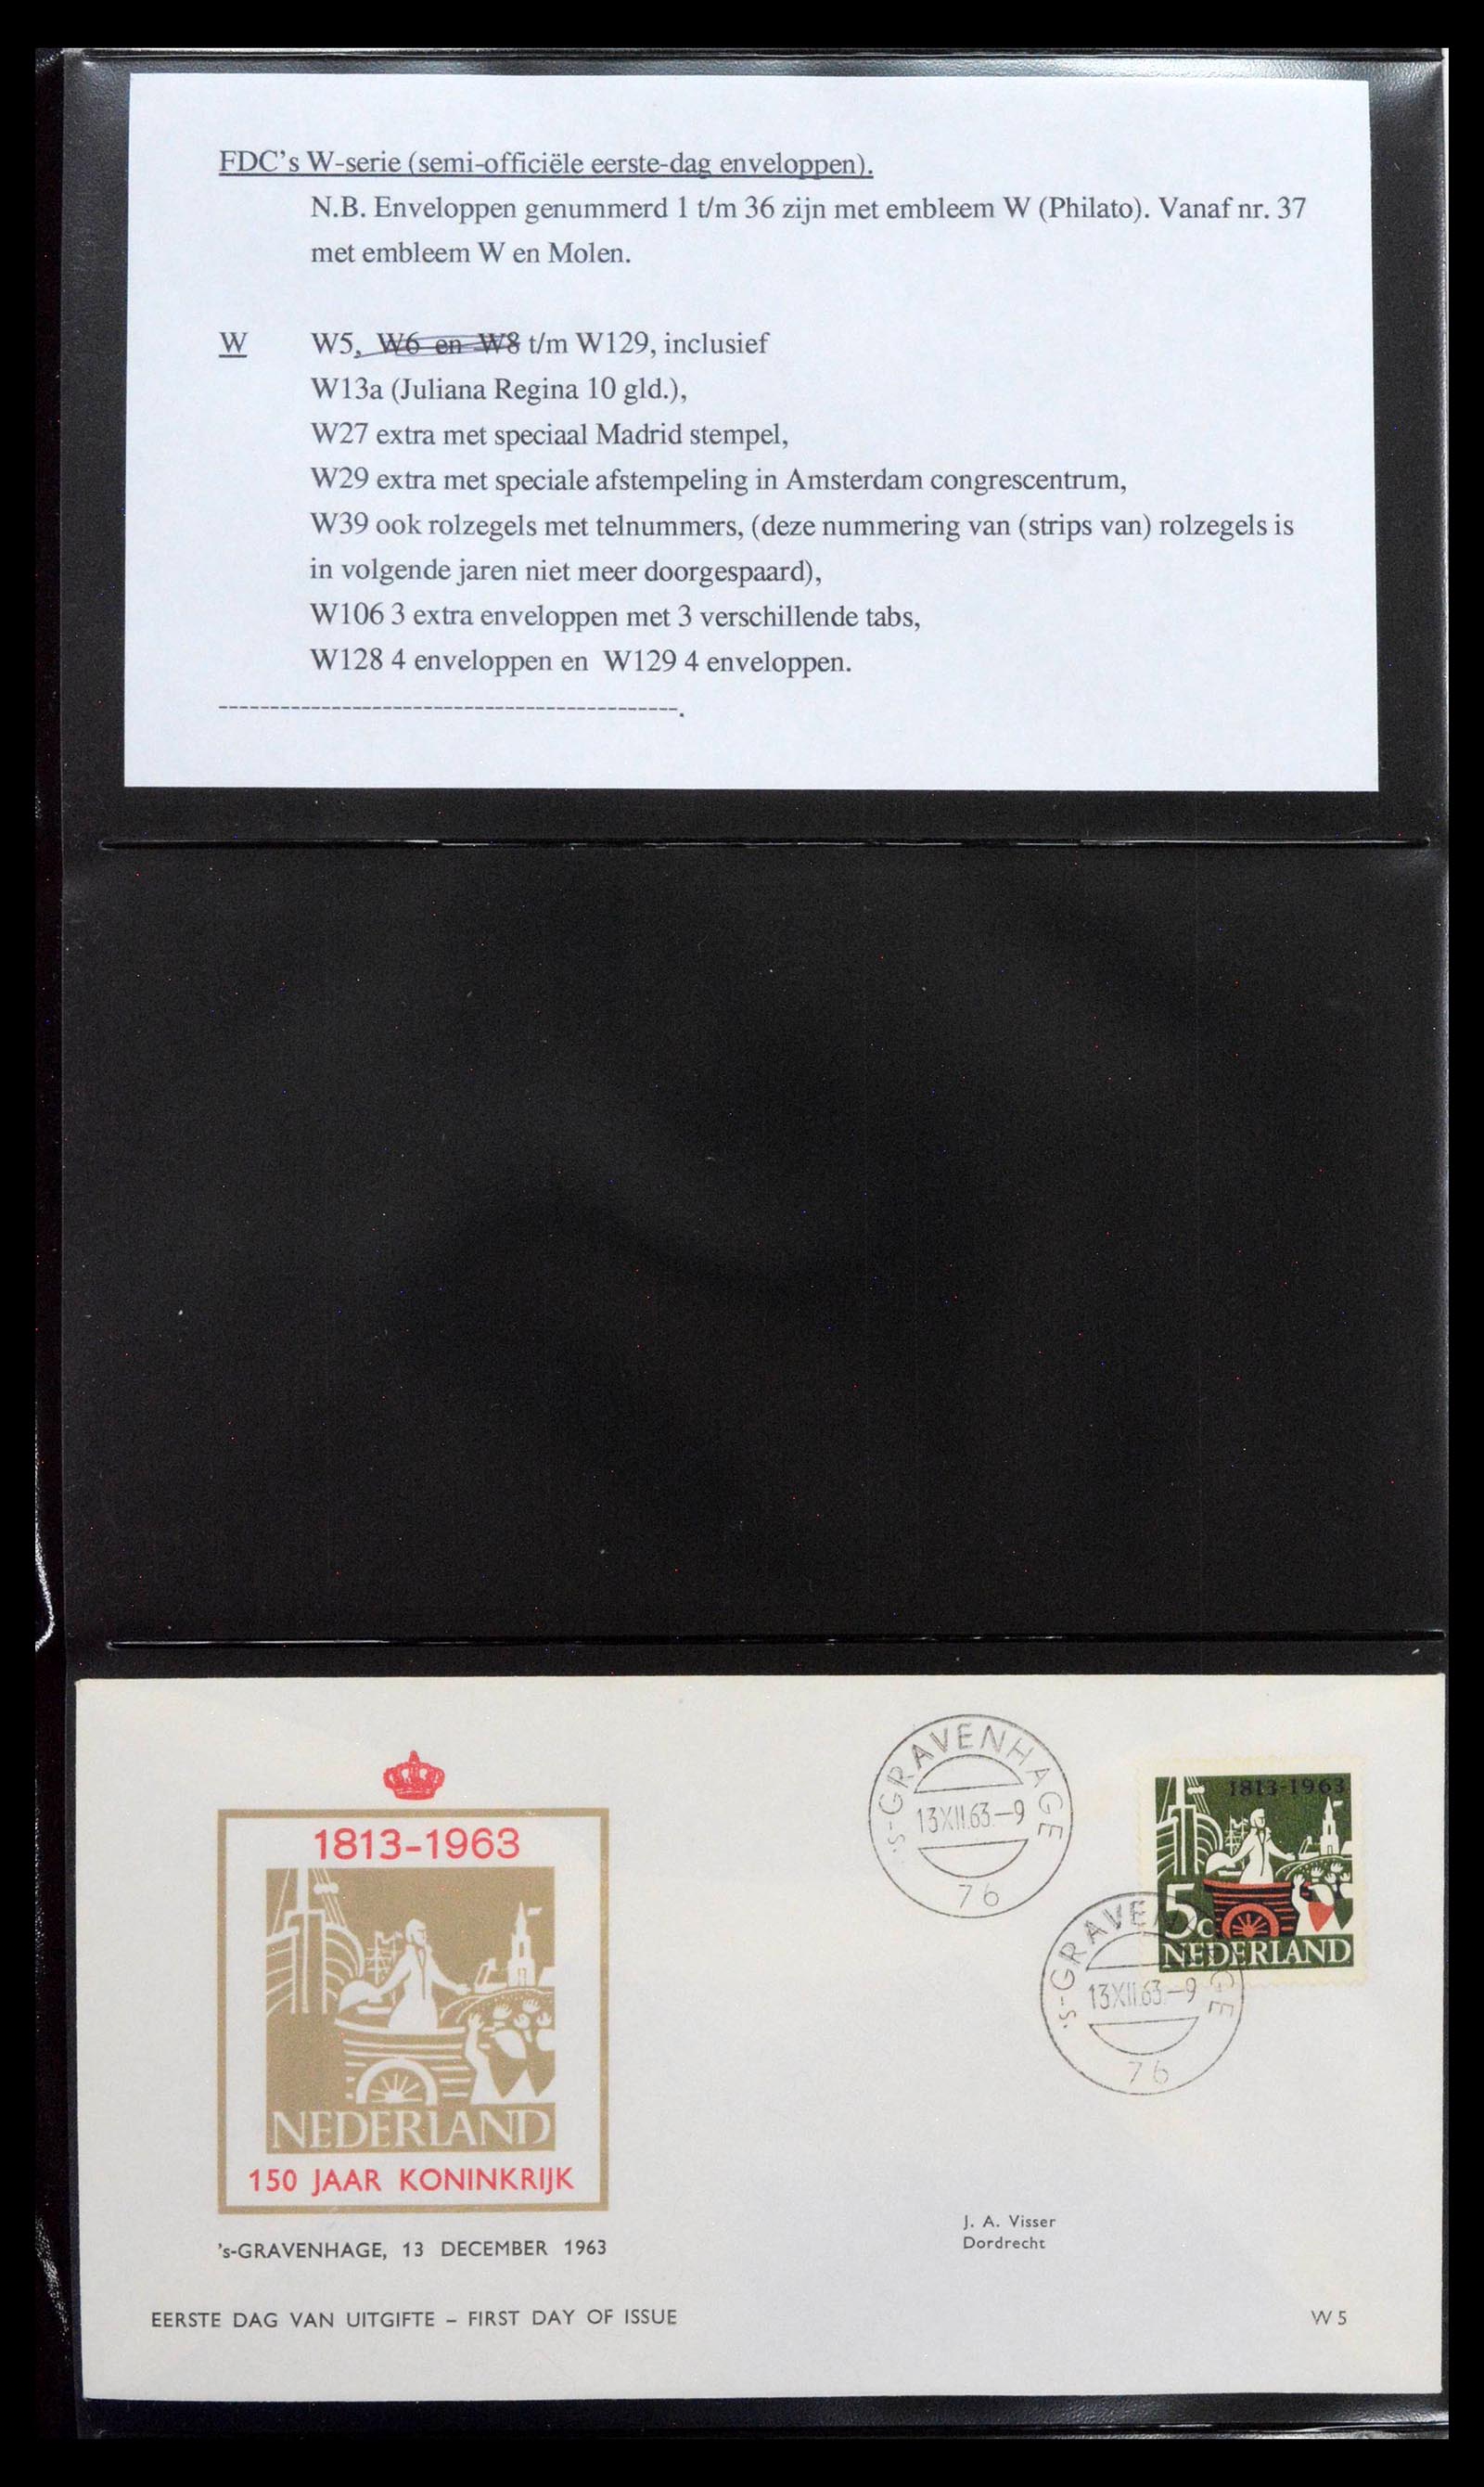 38559 0001 - Stamp collection 38559 Netherlands special first day covers.